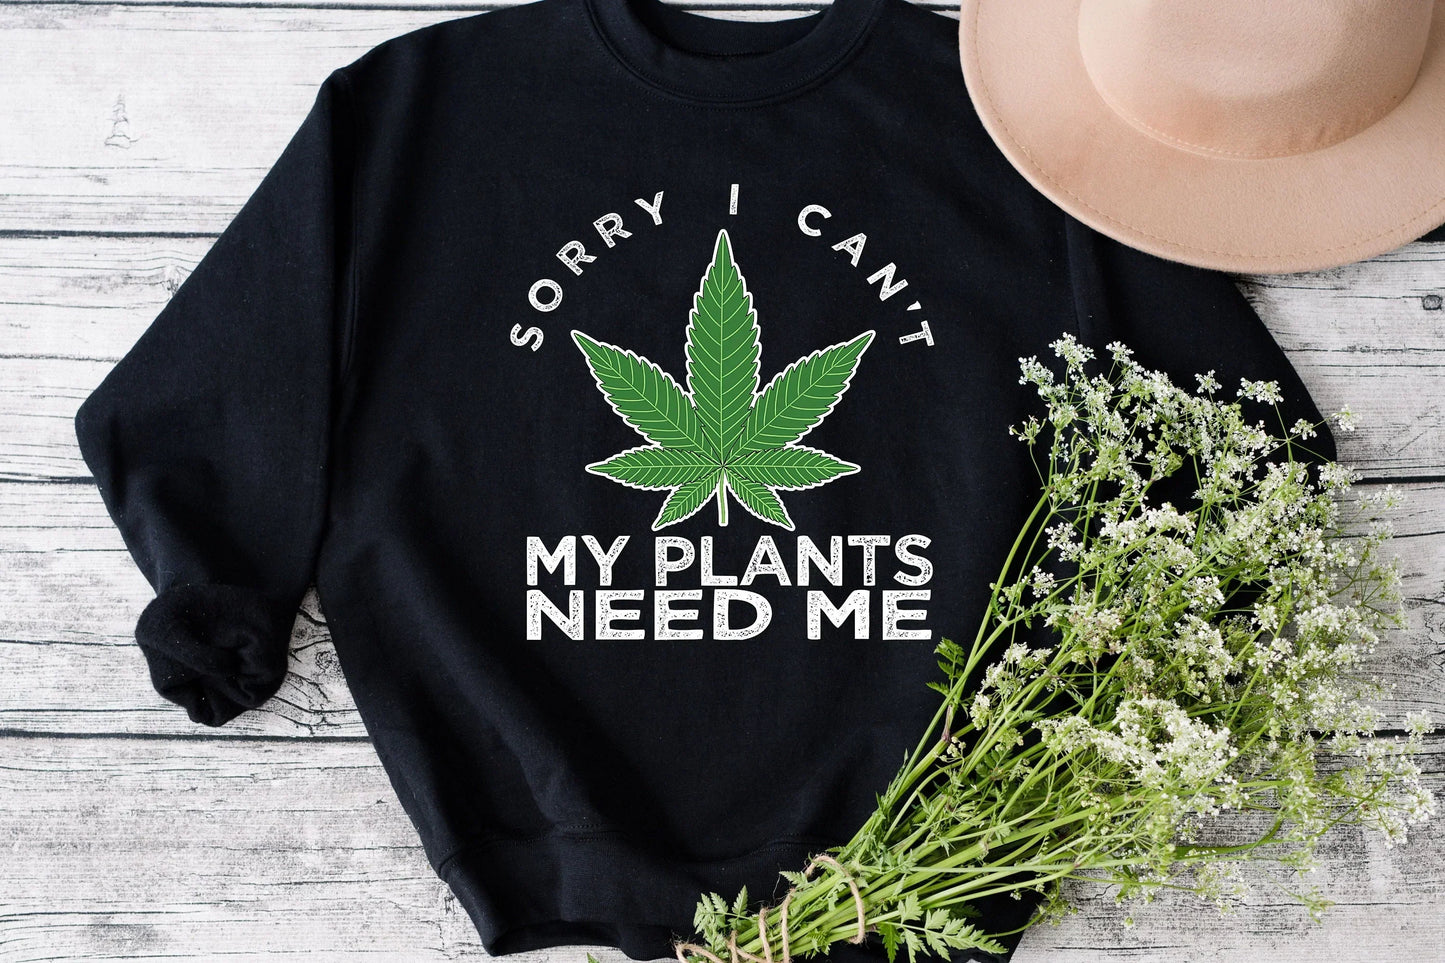 Hippie Clothes | Gift for Stoner Girls, Cannamoms, Crazy Plant Lady Pot Lovers, New Marijuana Smokers, Stoner Gift for Him/Her, Weed Gifts HMDesignStudioUS